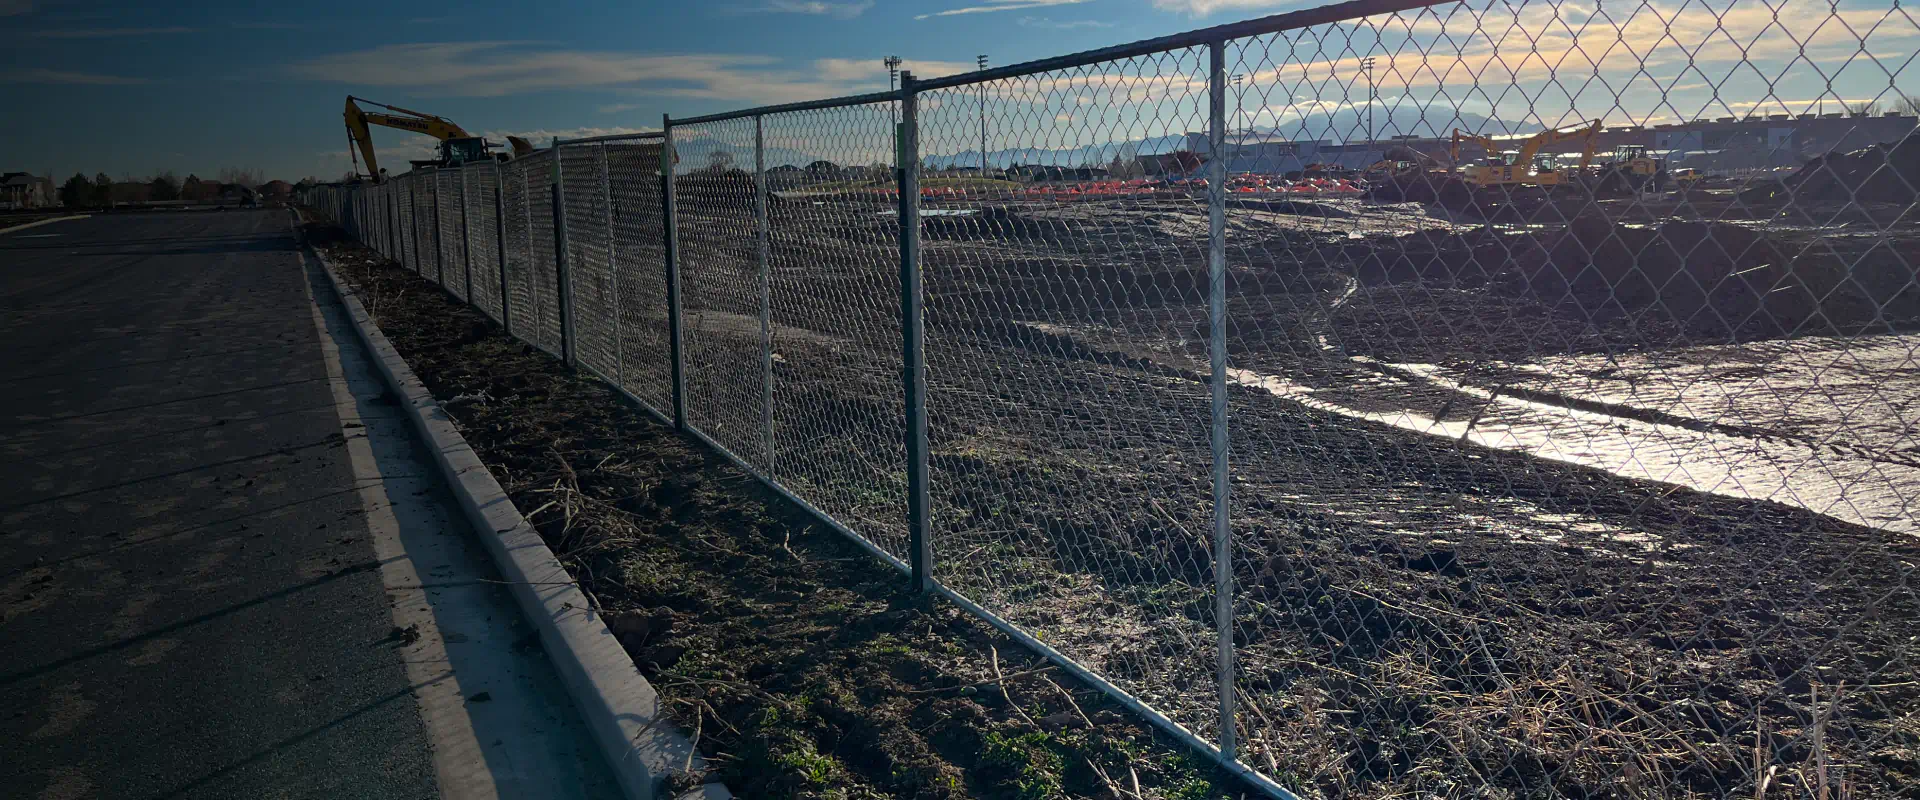 chain link fence in a commercial property